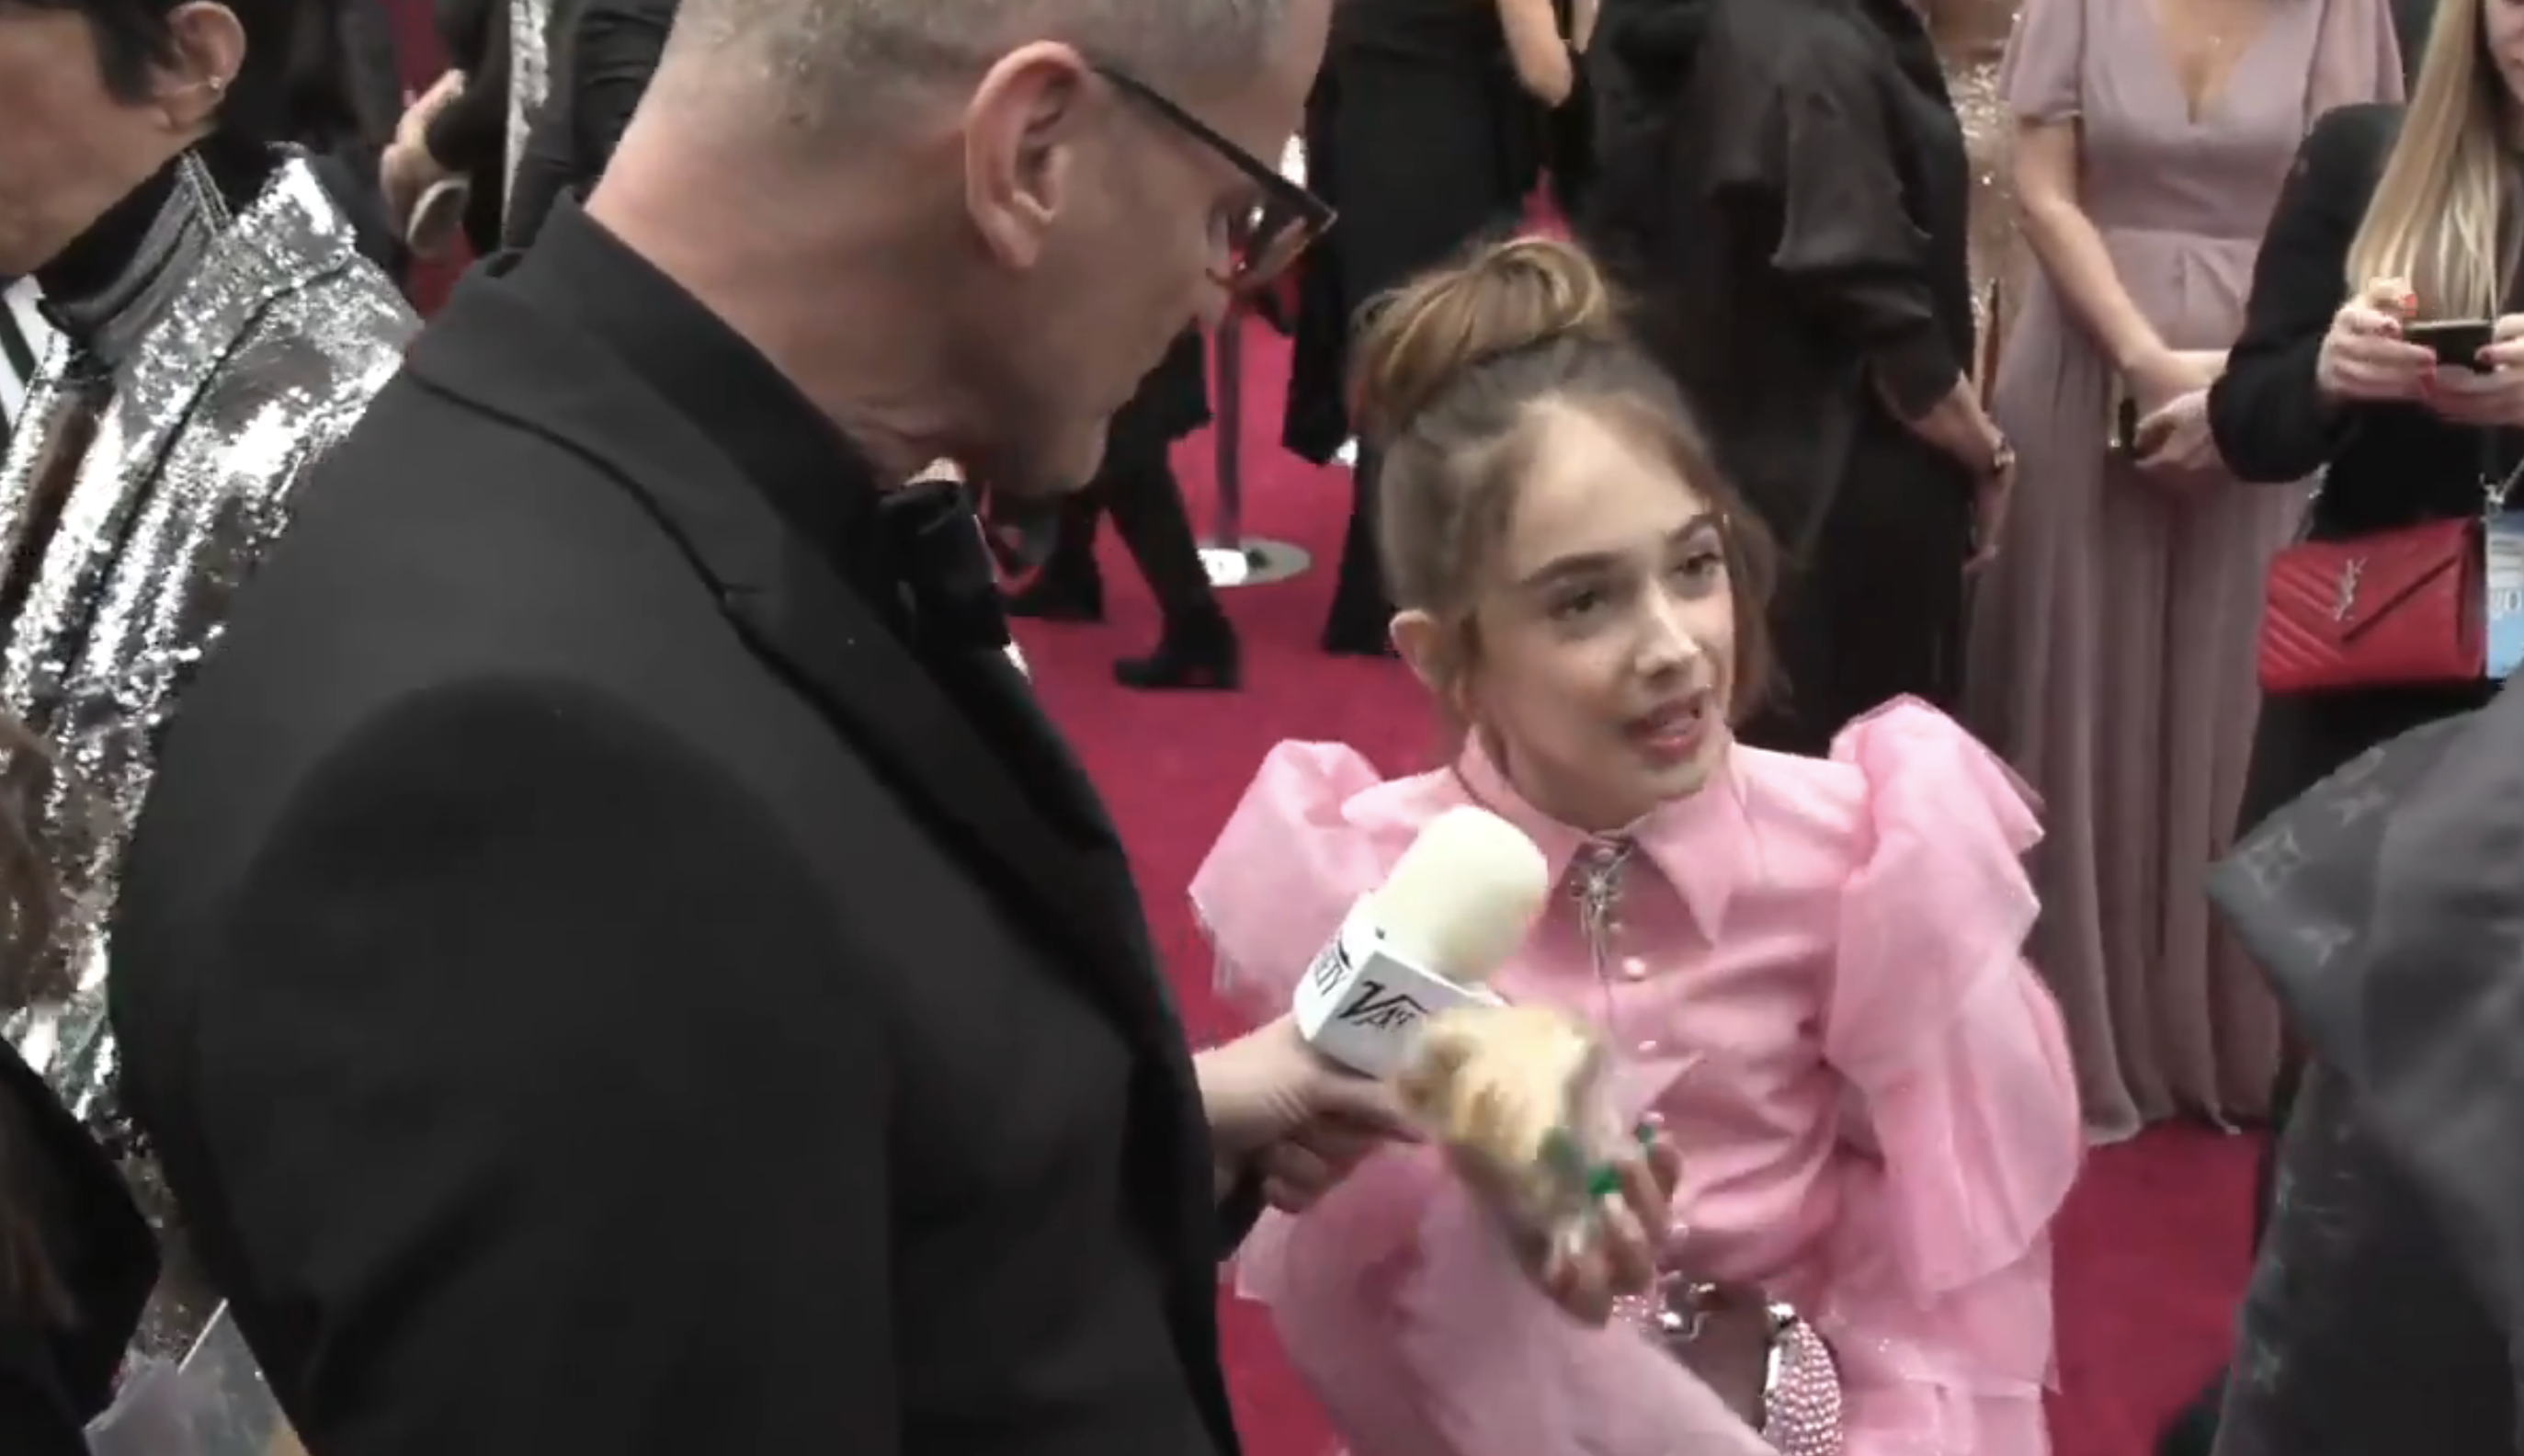 Julia in a ruffled outfit being interviewed by a reporter on the red carpet